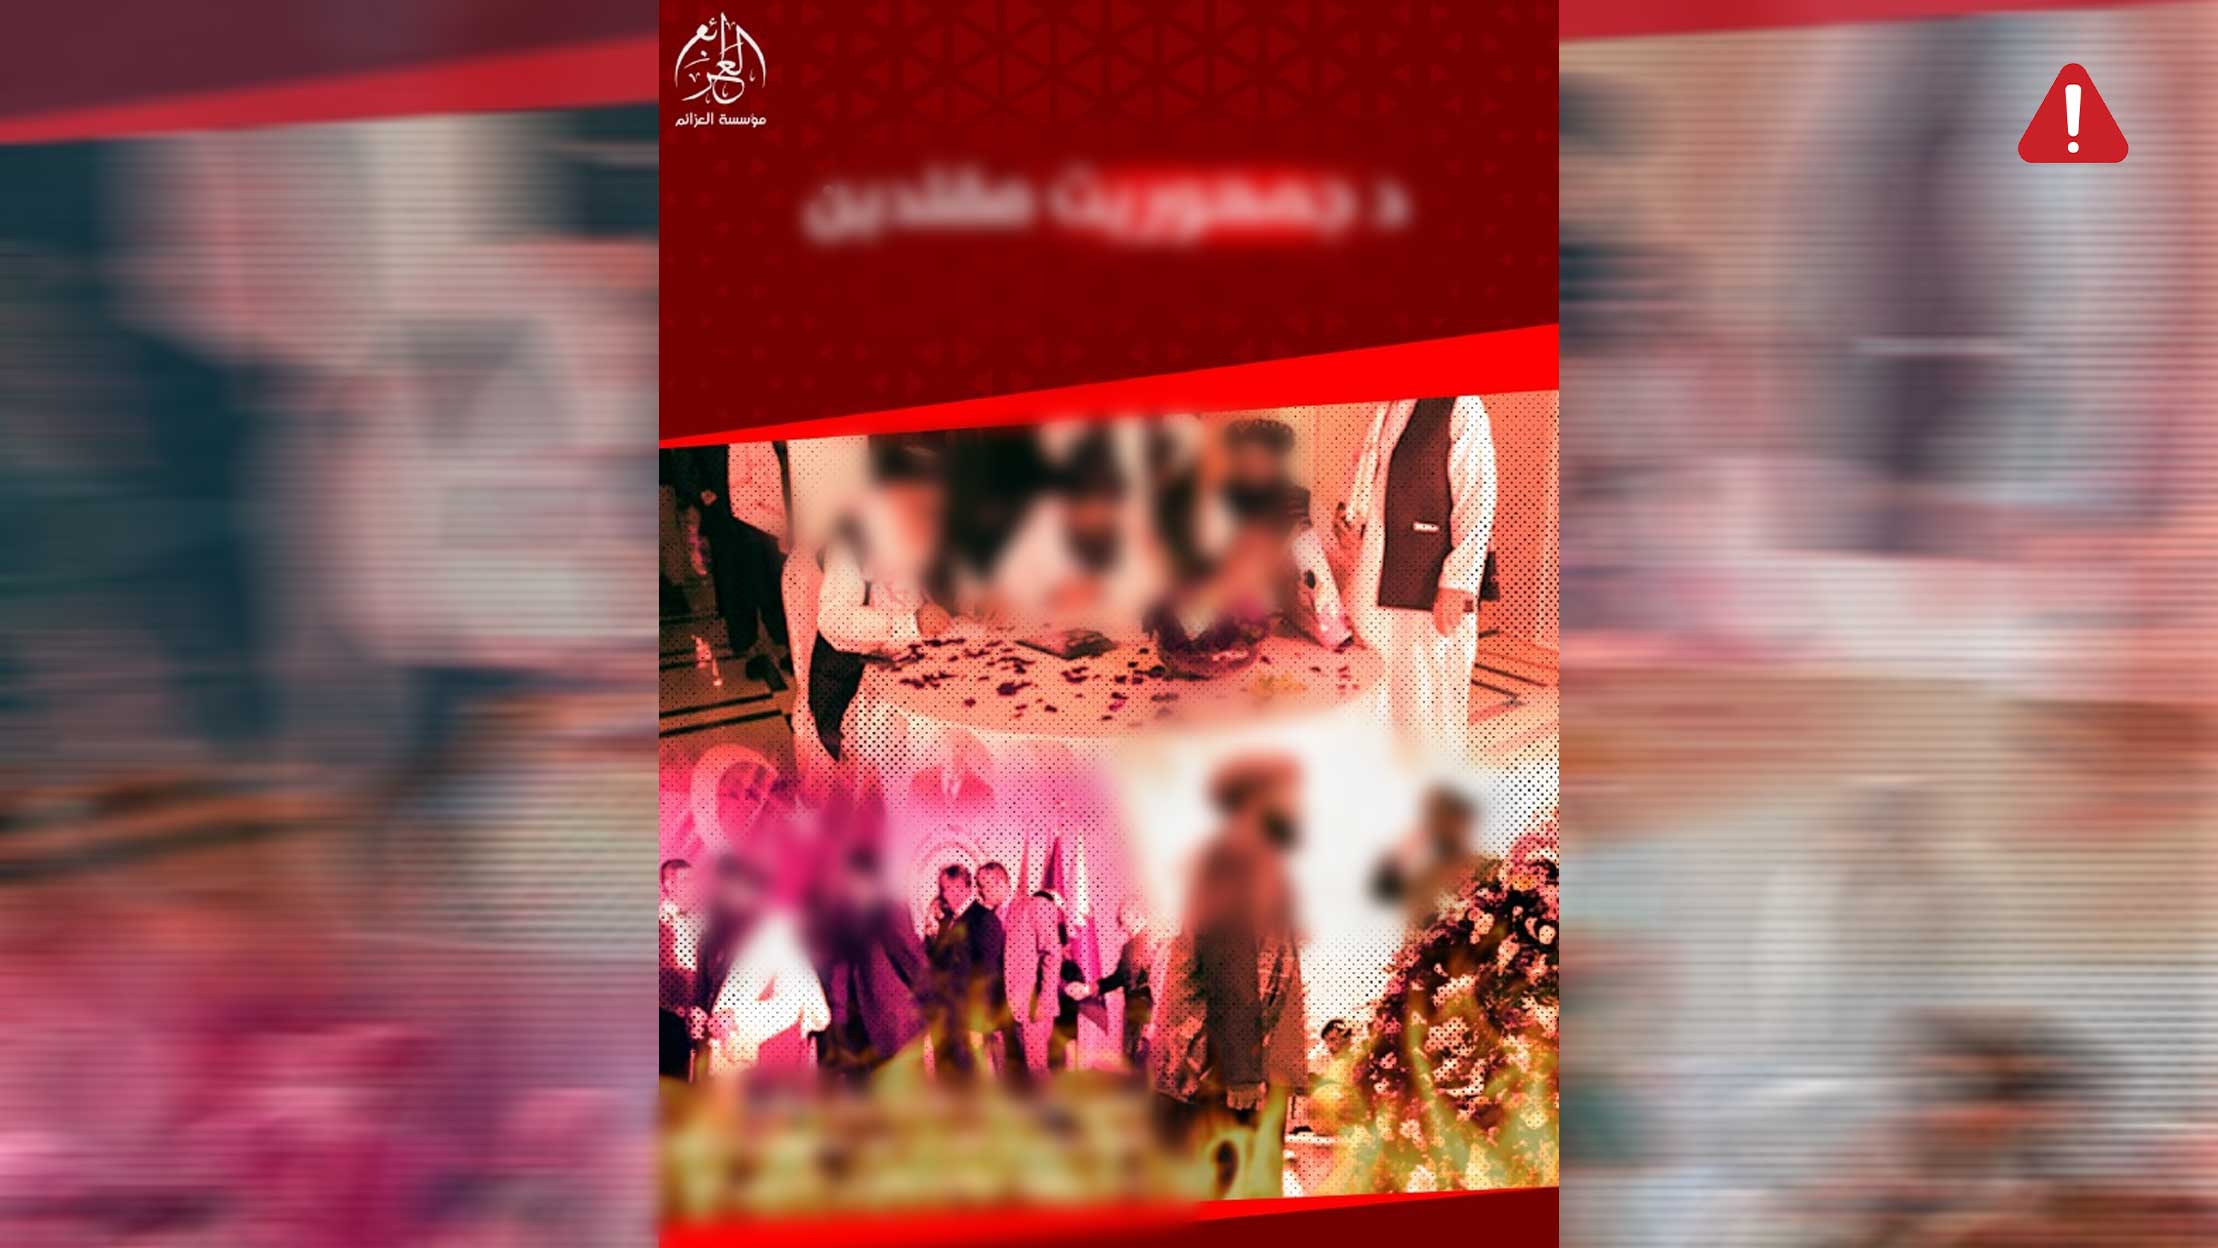 TKD MONITORING: New ISKP Booklet Criticizes Afghan Taliban, Draws Parallel with Türkiye